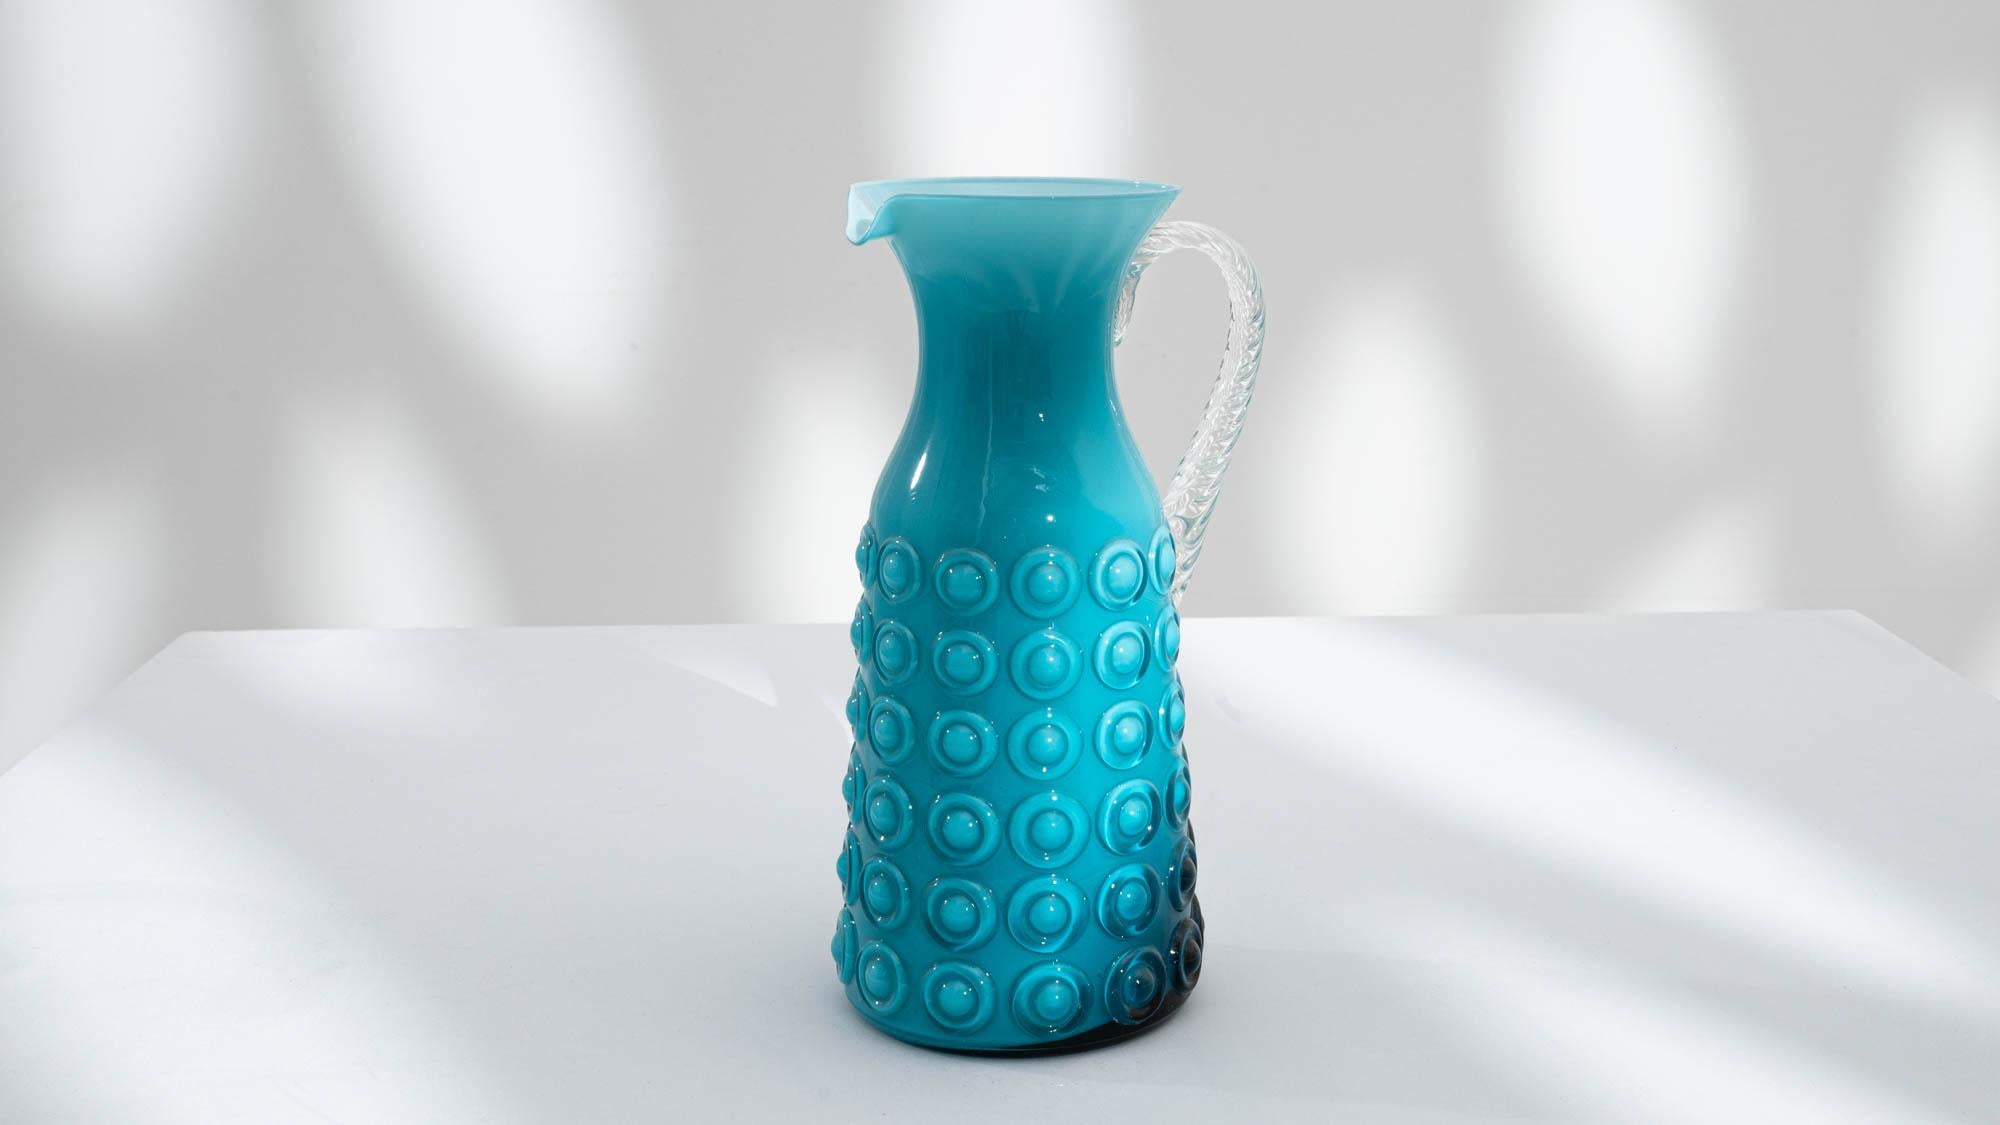 Exemplifying artistic innovation, this 20th-century Italian blue glass jug showcases a captivating 3D bubble design, bathed in a mesmerizing bright blue/green hue. The handle, rendered in textured white glass, adds a tactile element to the jug's